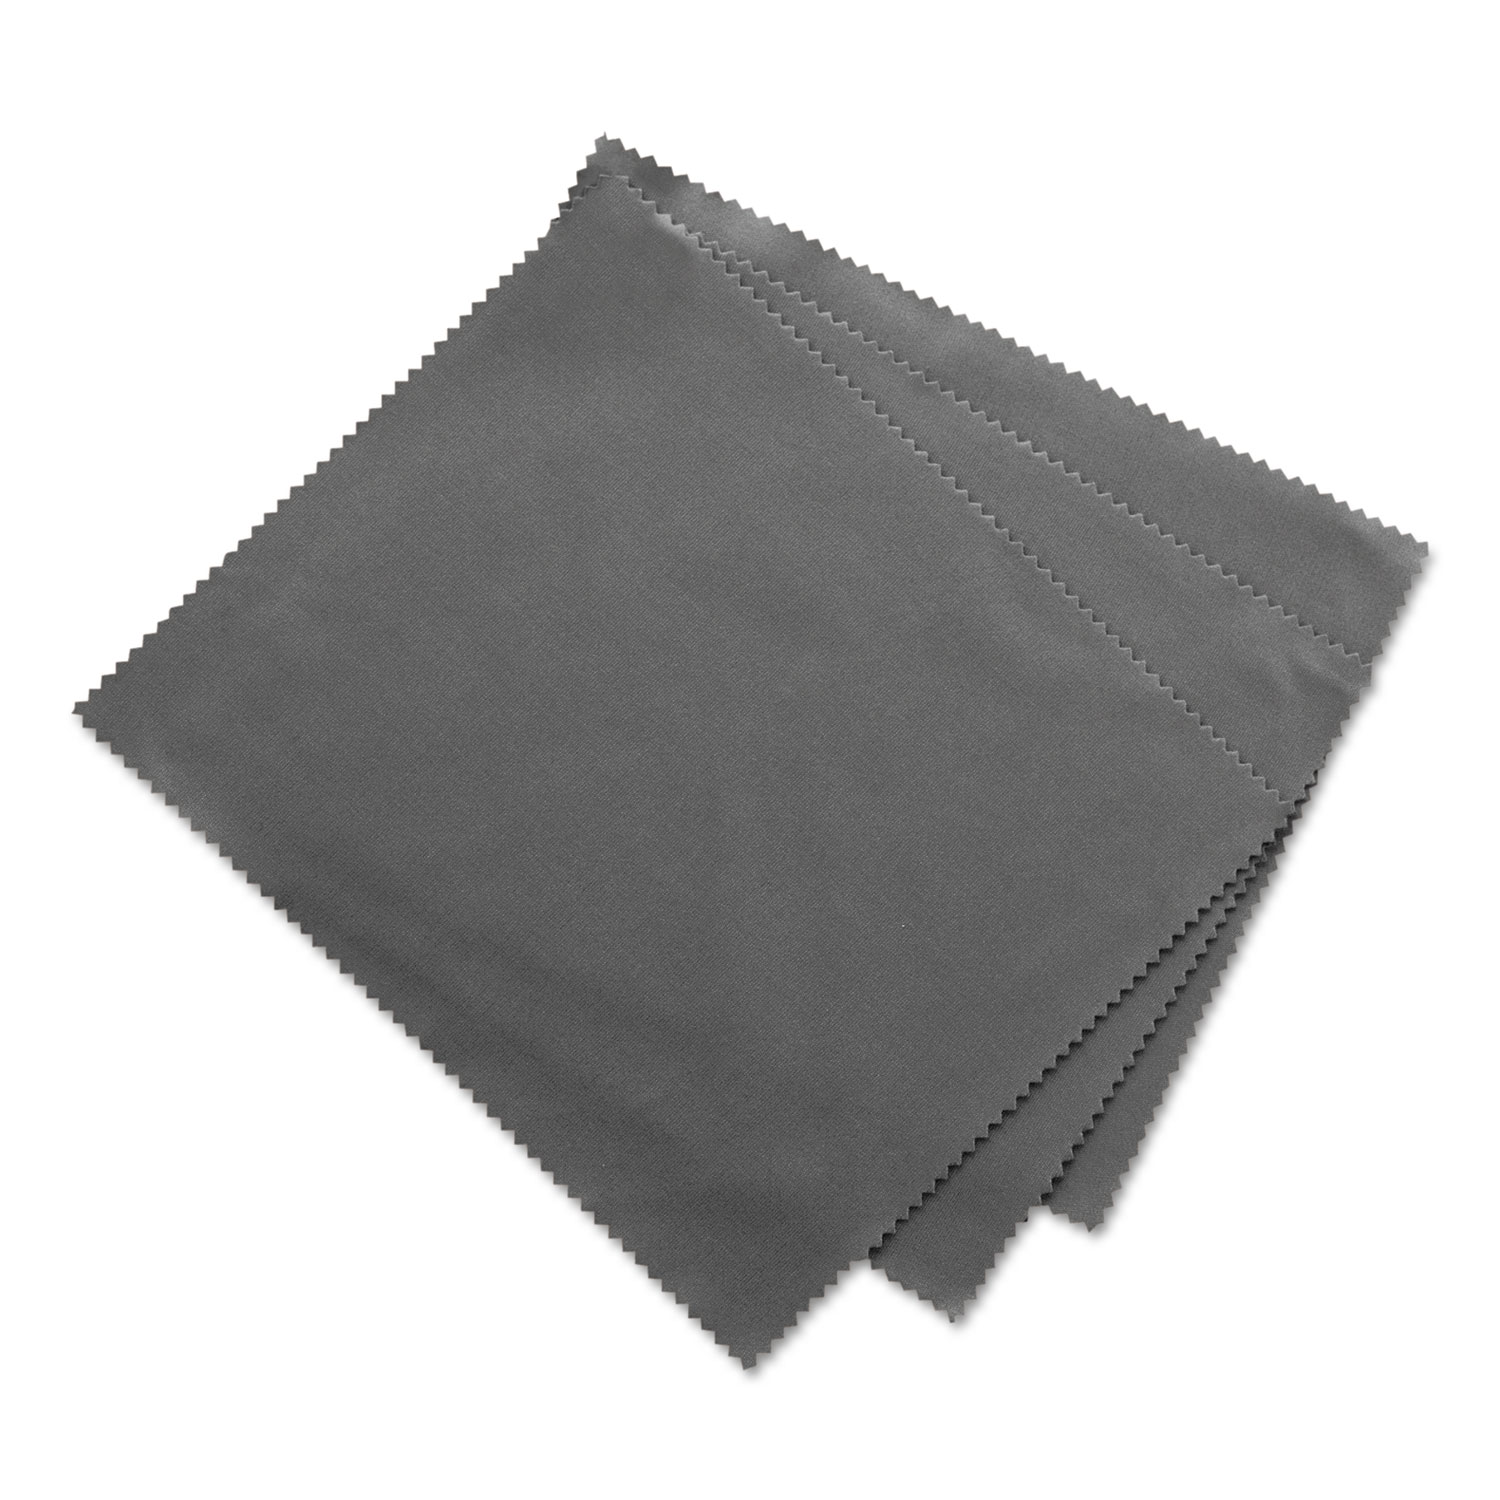 Microfiber Cleaning Cloths, 6 x 7, Grey, 3/Pack